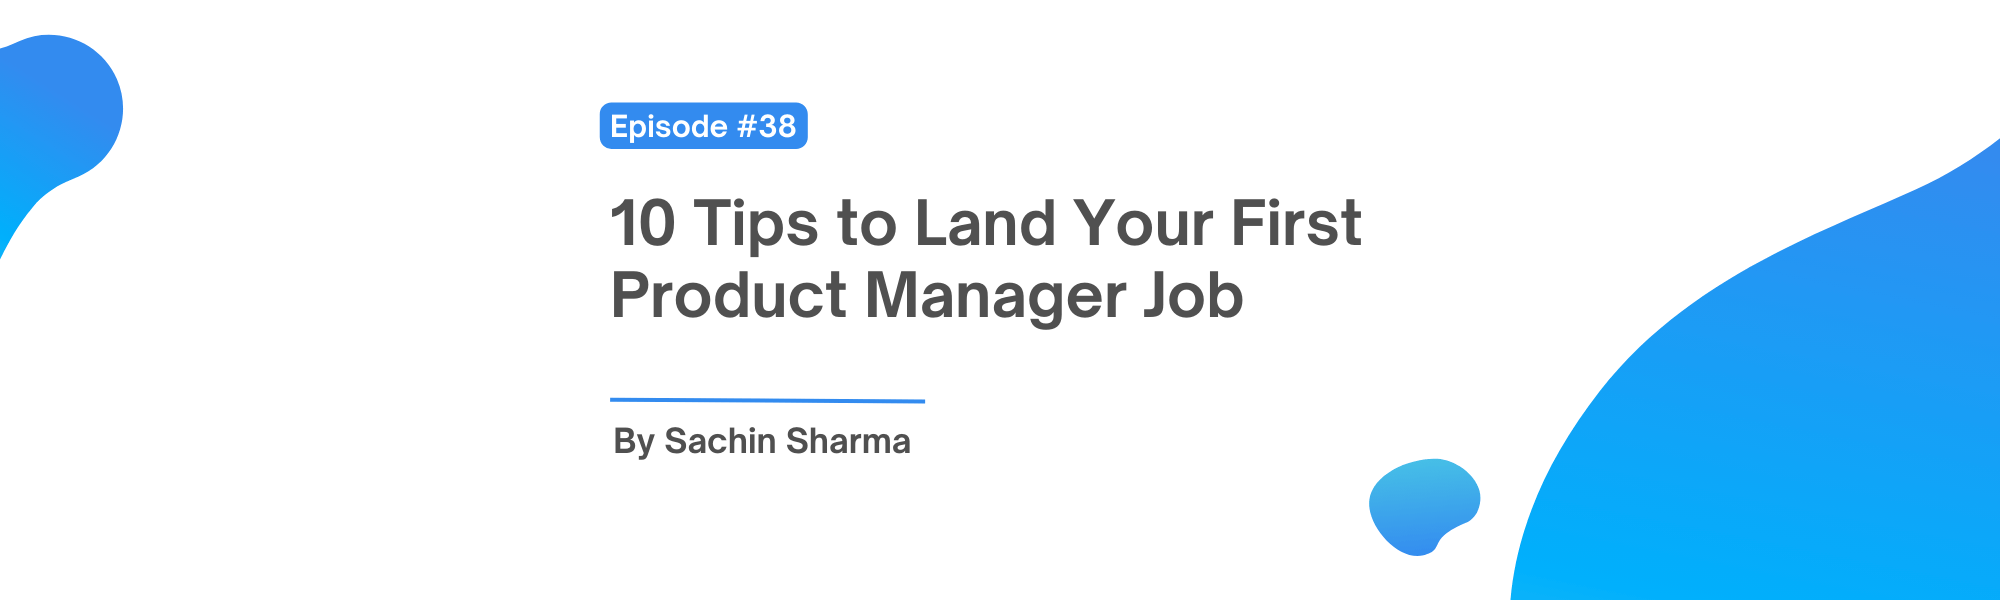 10 Tips to Land Your First Product Manager Job